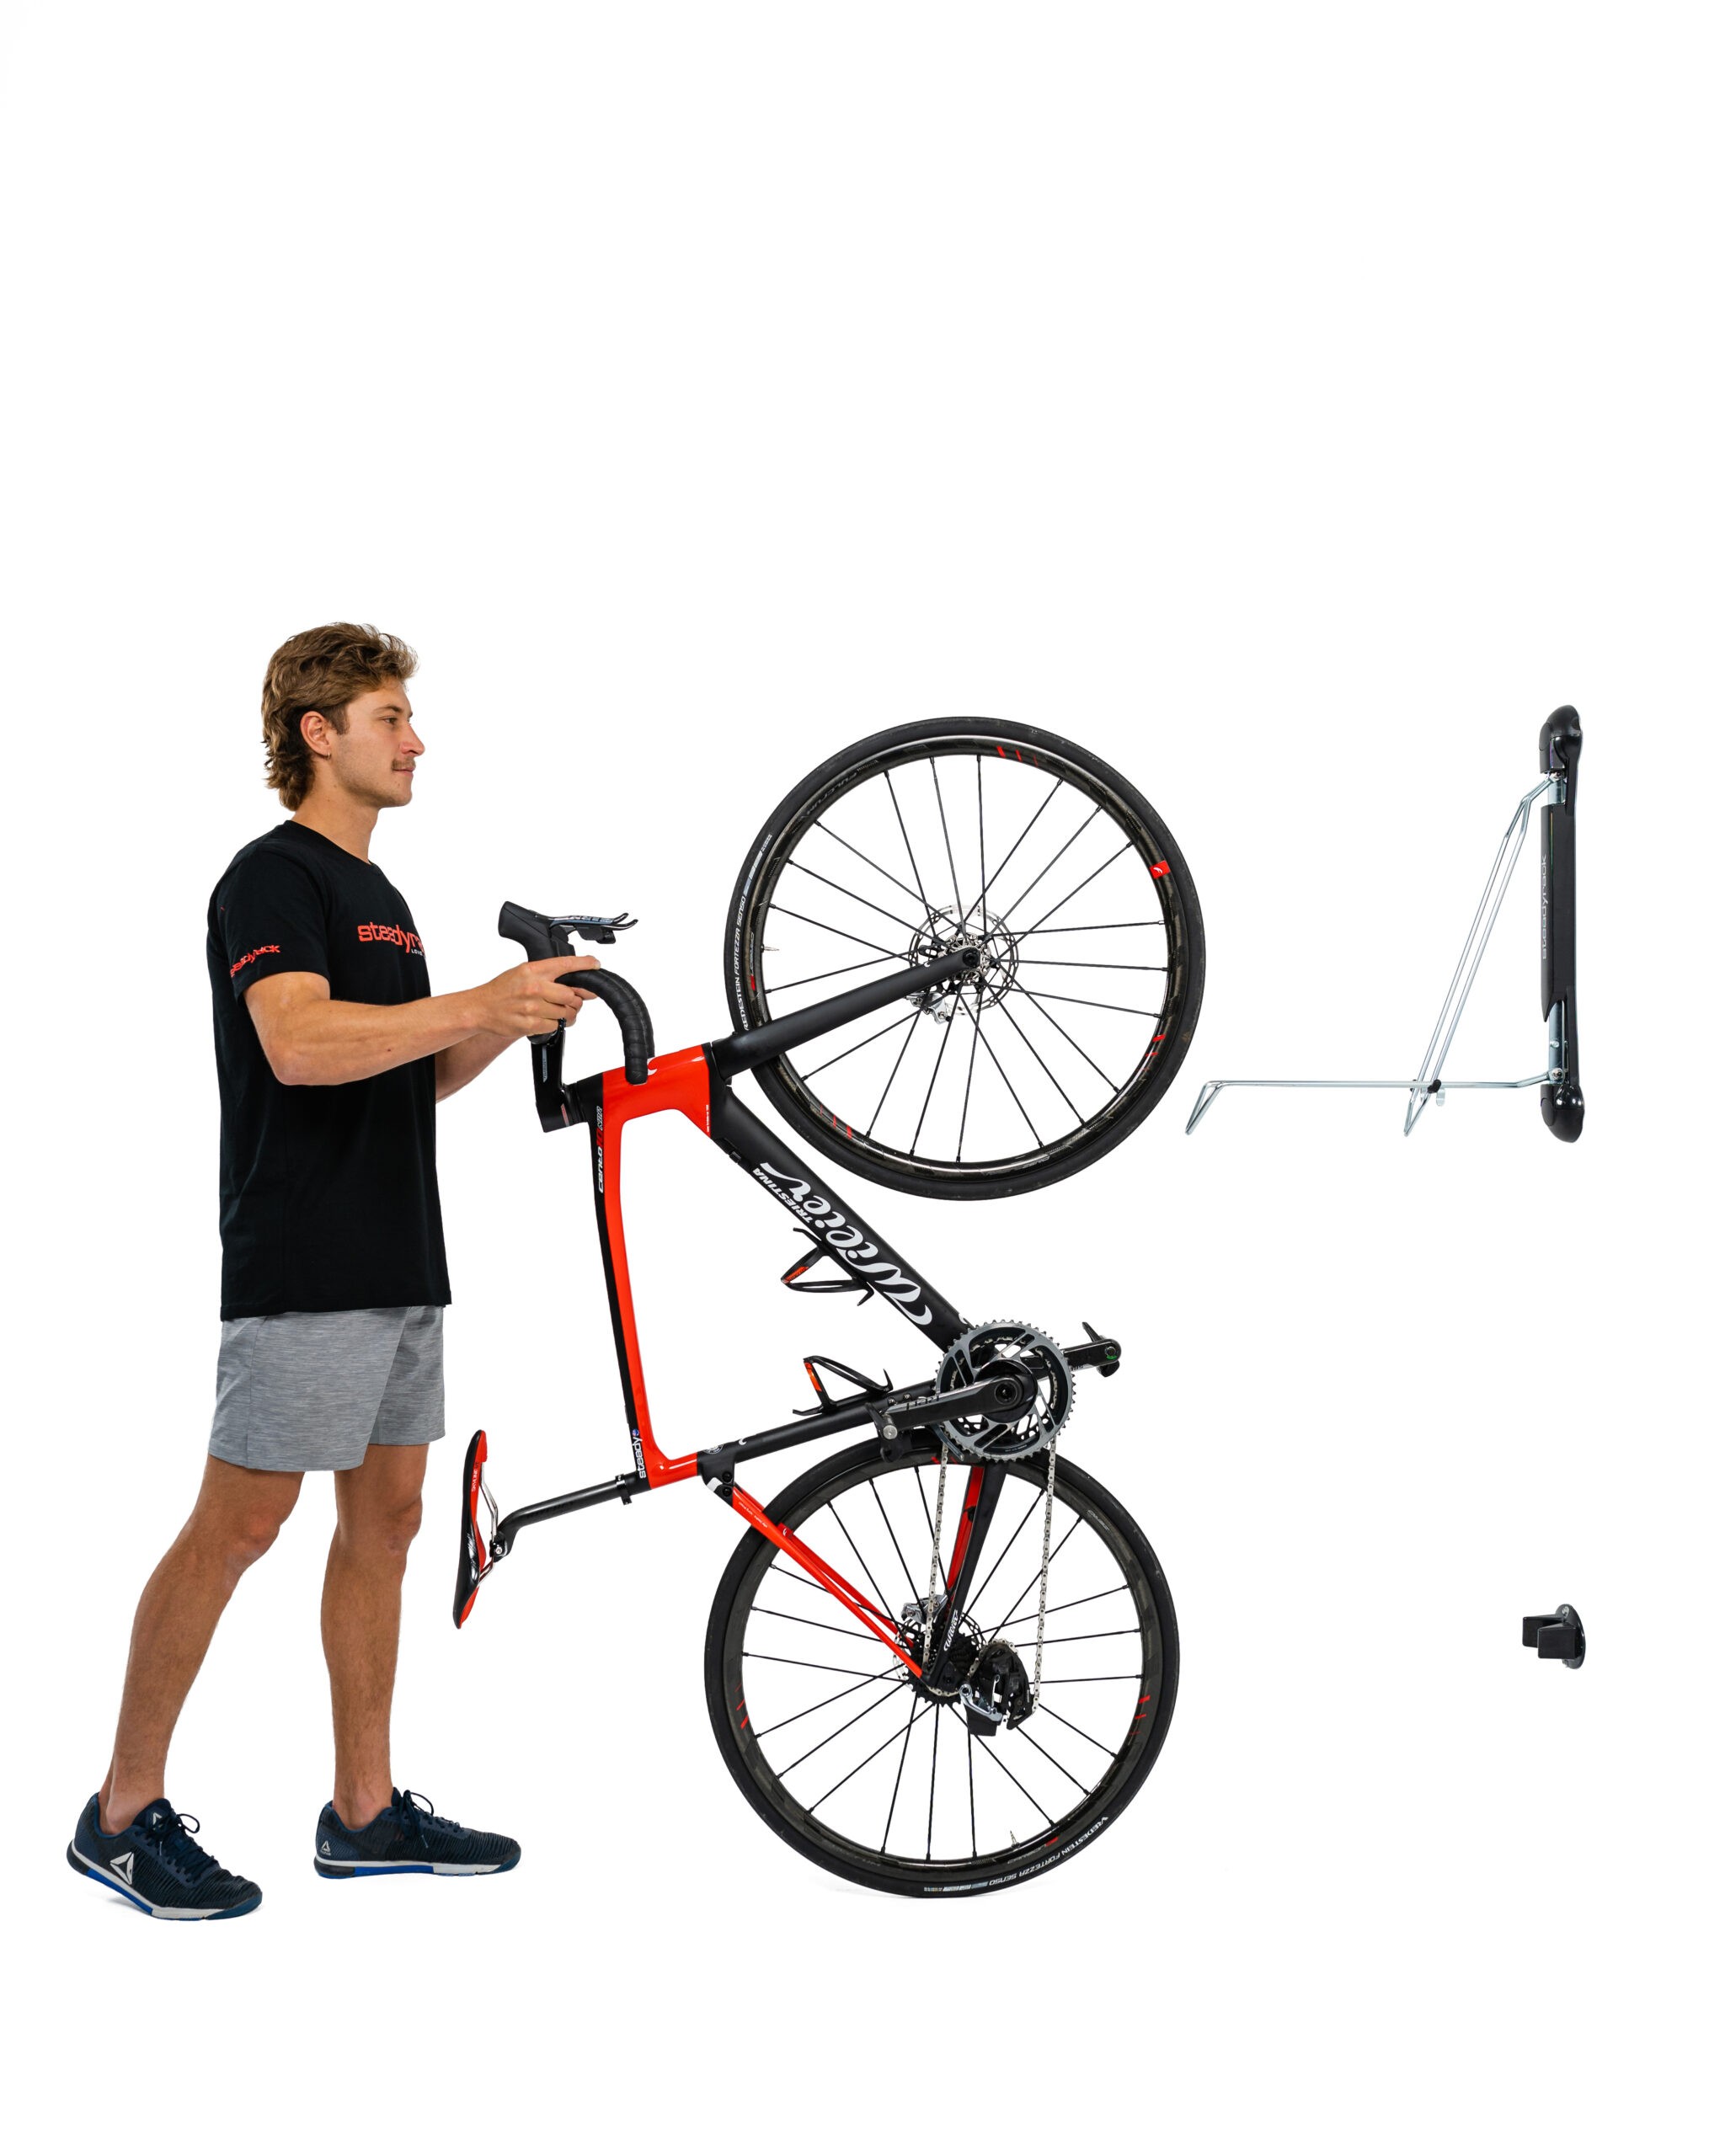 Bike racks Steadyrack CLASSIC for electric, road, hybrid, small MTB, BMX bikes with tires up to 5,33 cm wide